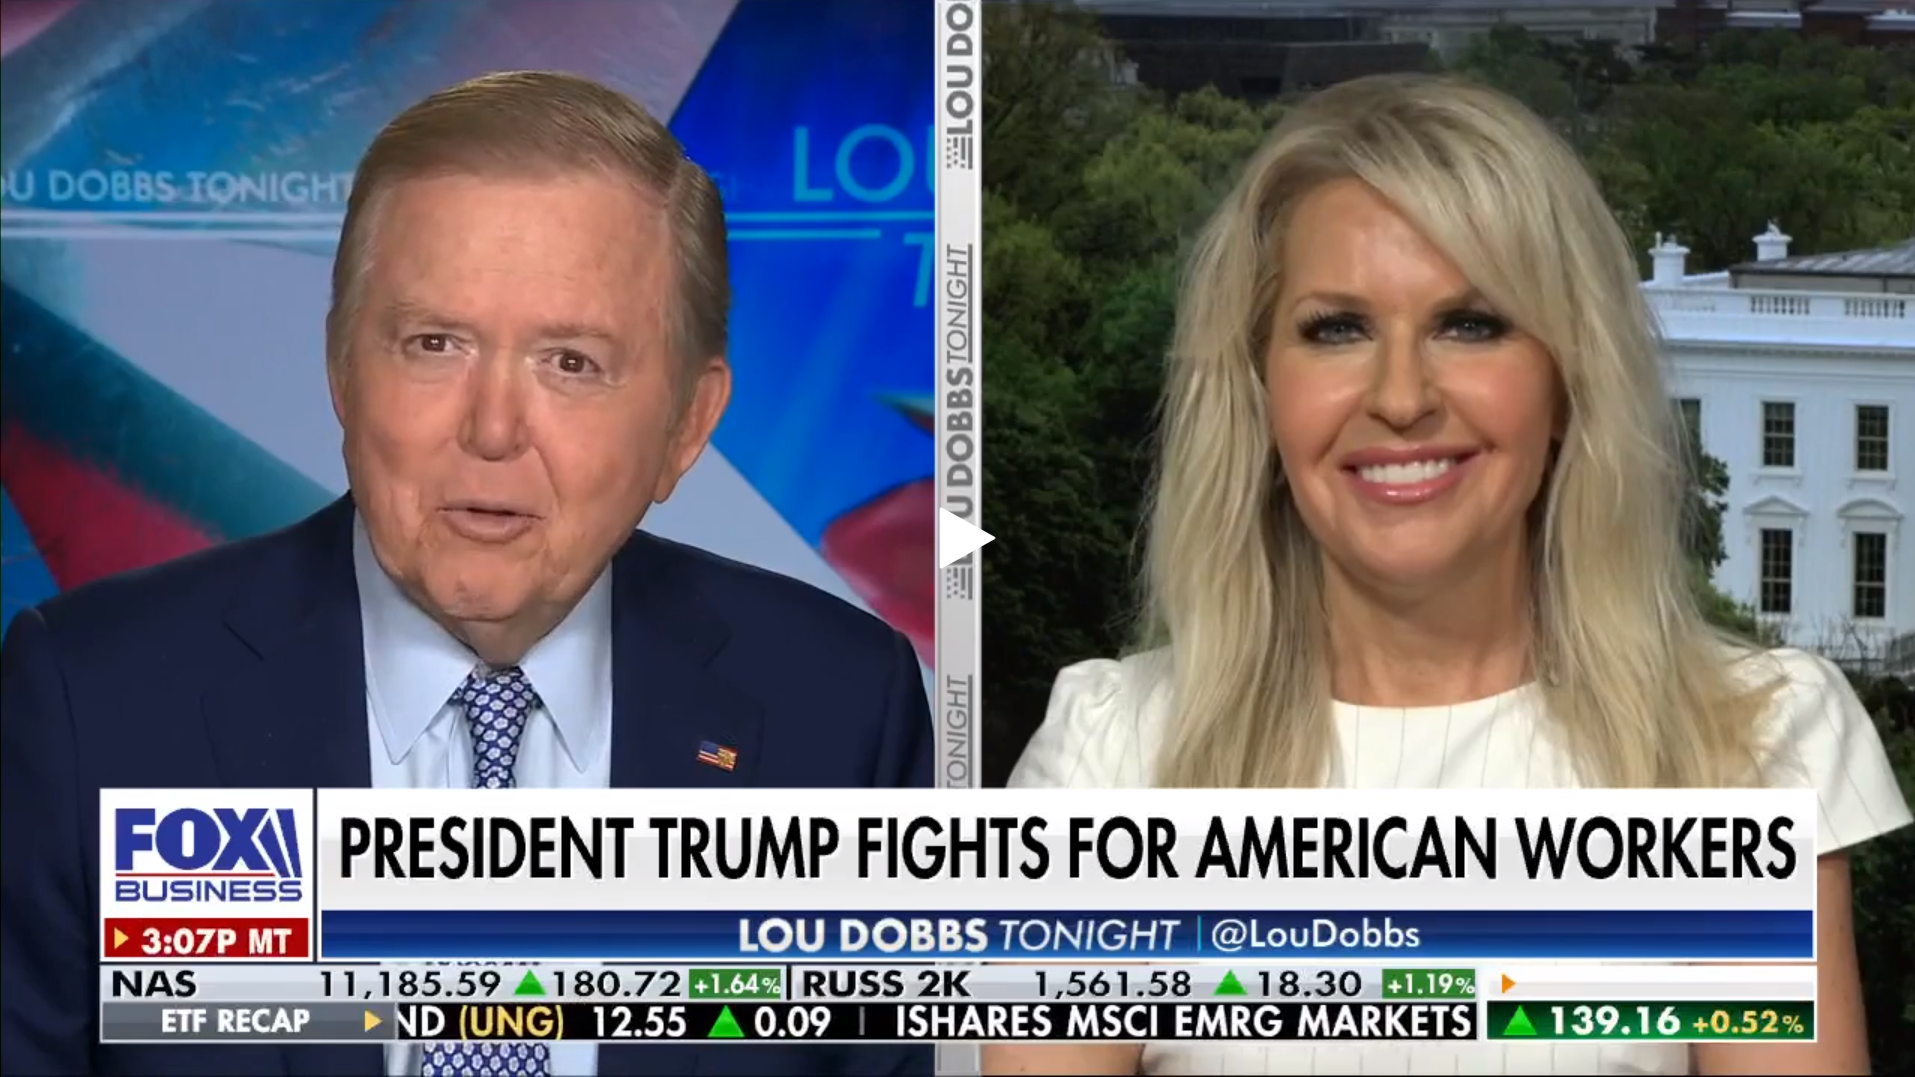 Lou Dobbs on Fox Business speaking with Assistant Secretary Monica Crowley